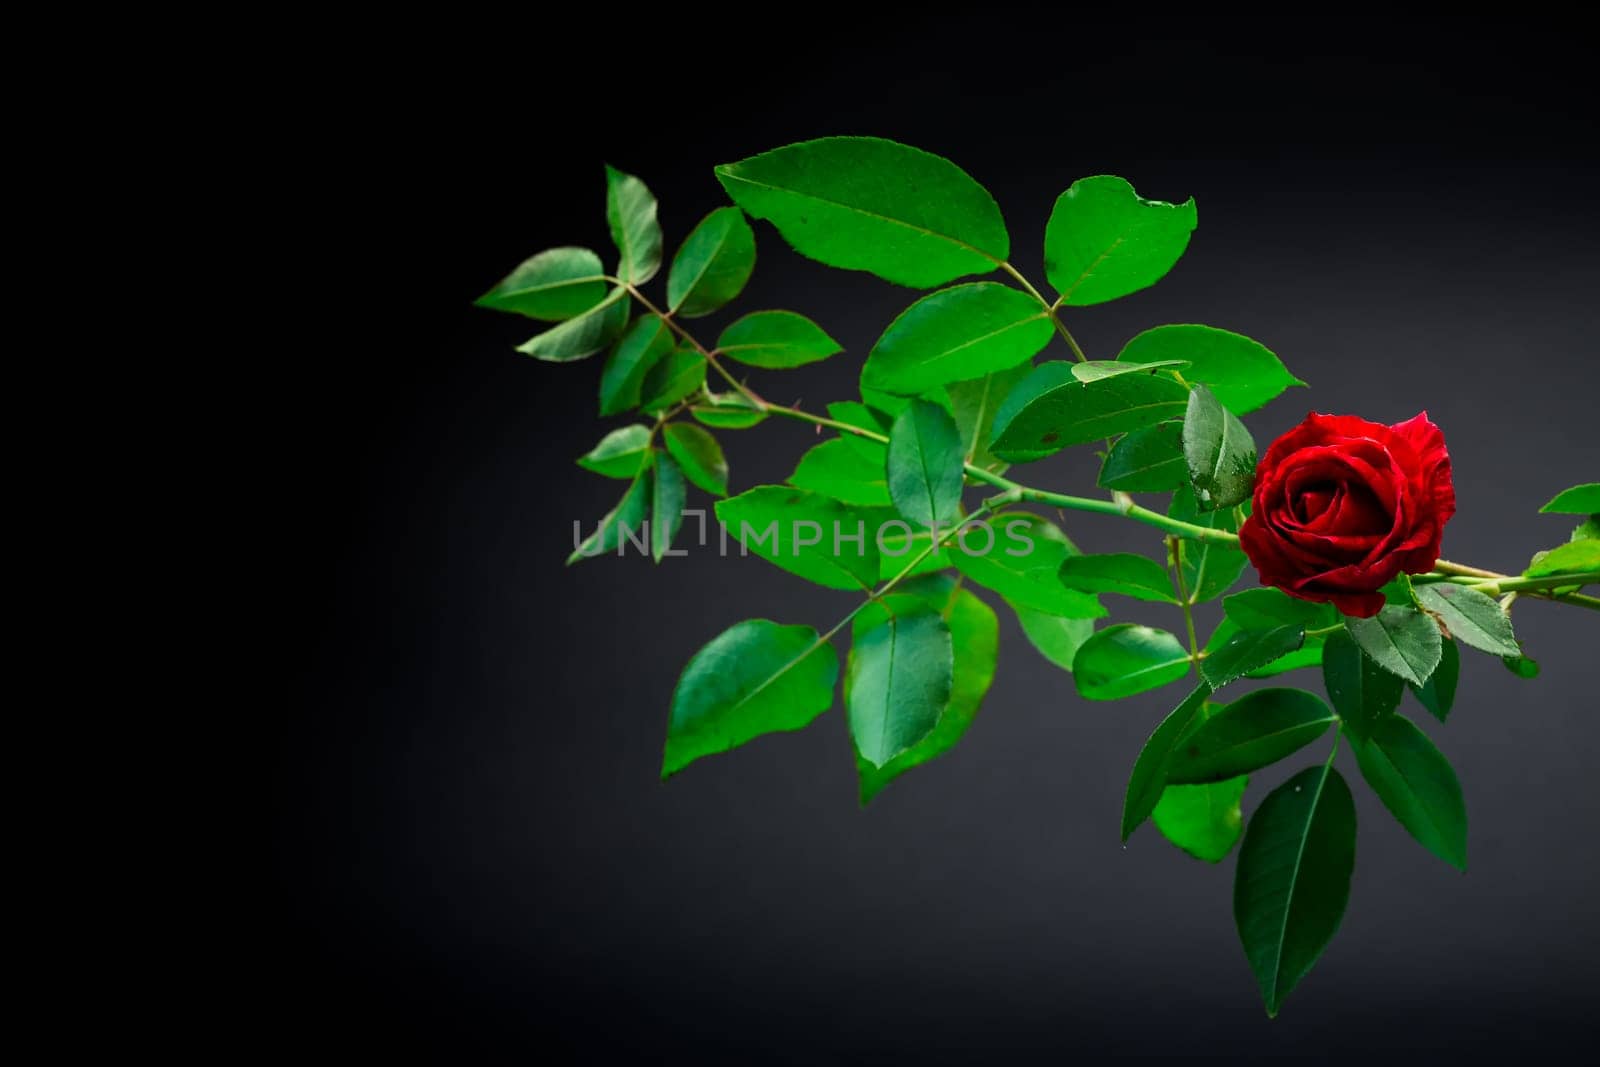 Red rose on a branch with foliage isolated on a black background.